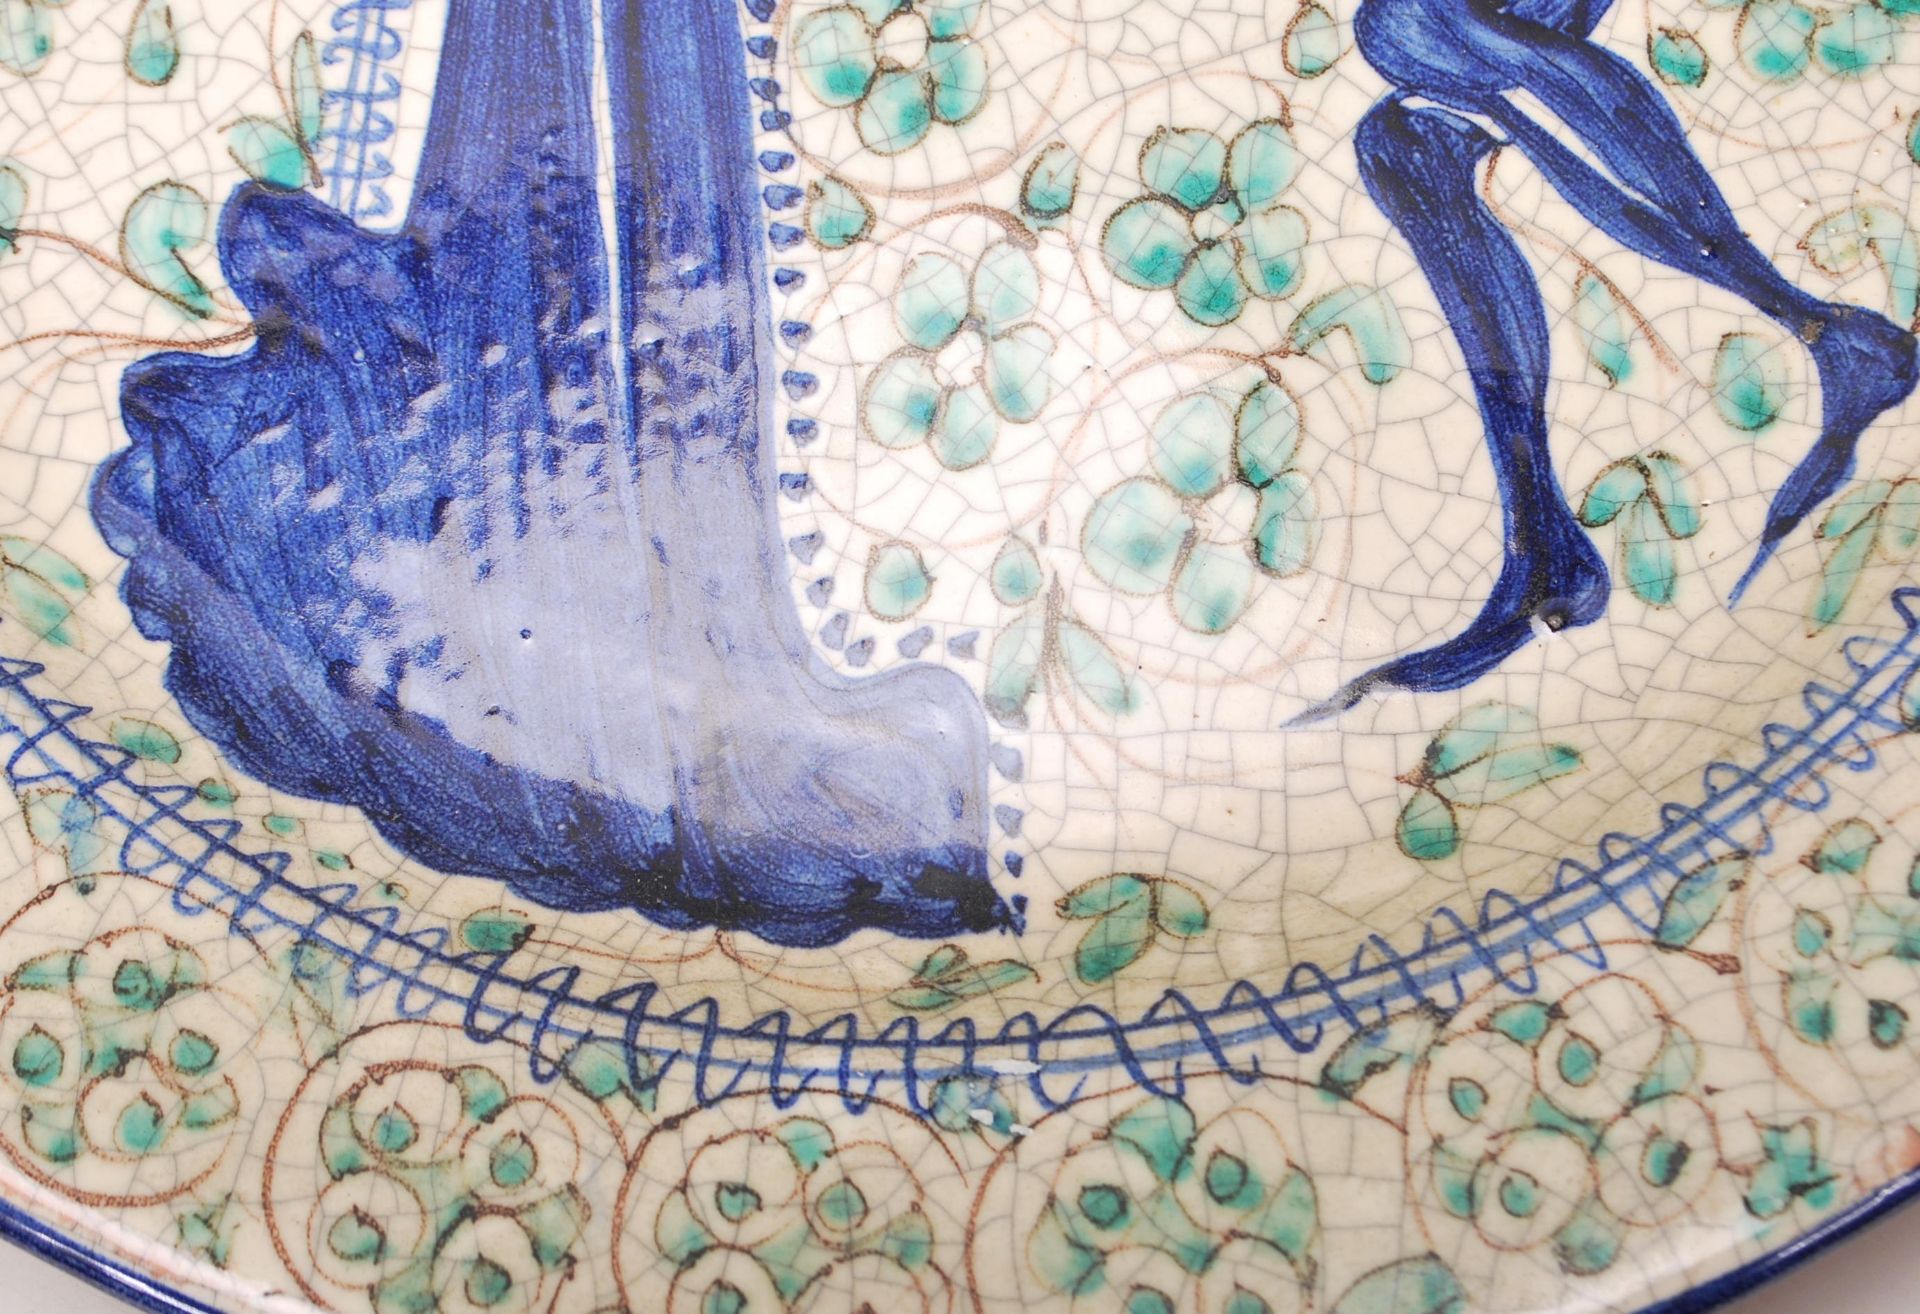 LATE 20TH CENTURY PERSIAN ISLAMIC FAIENCE CHARGER - Image 3 of 7